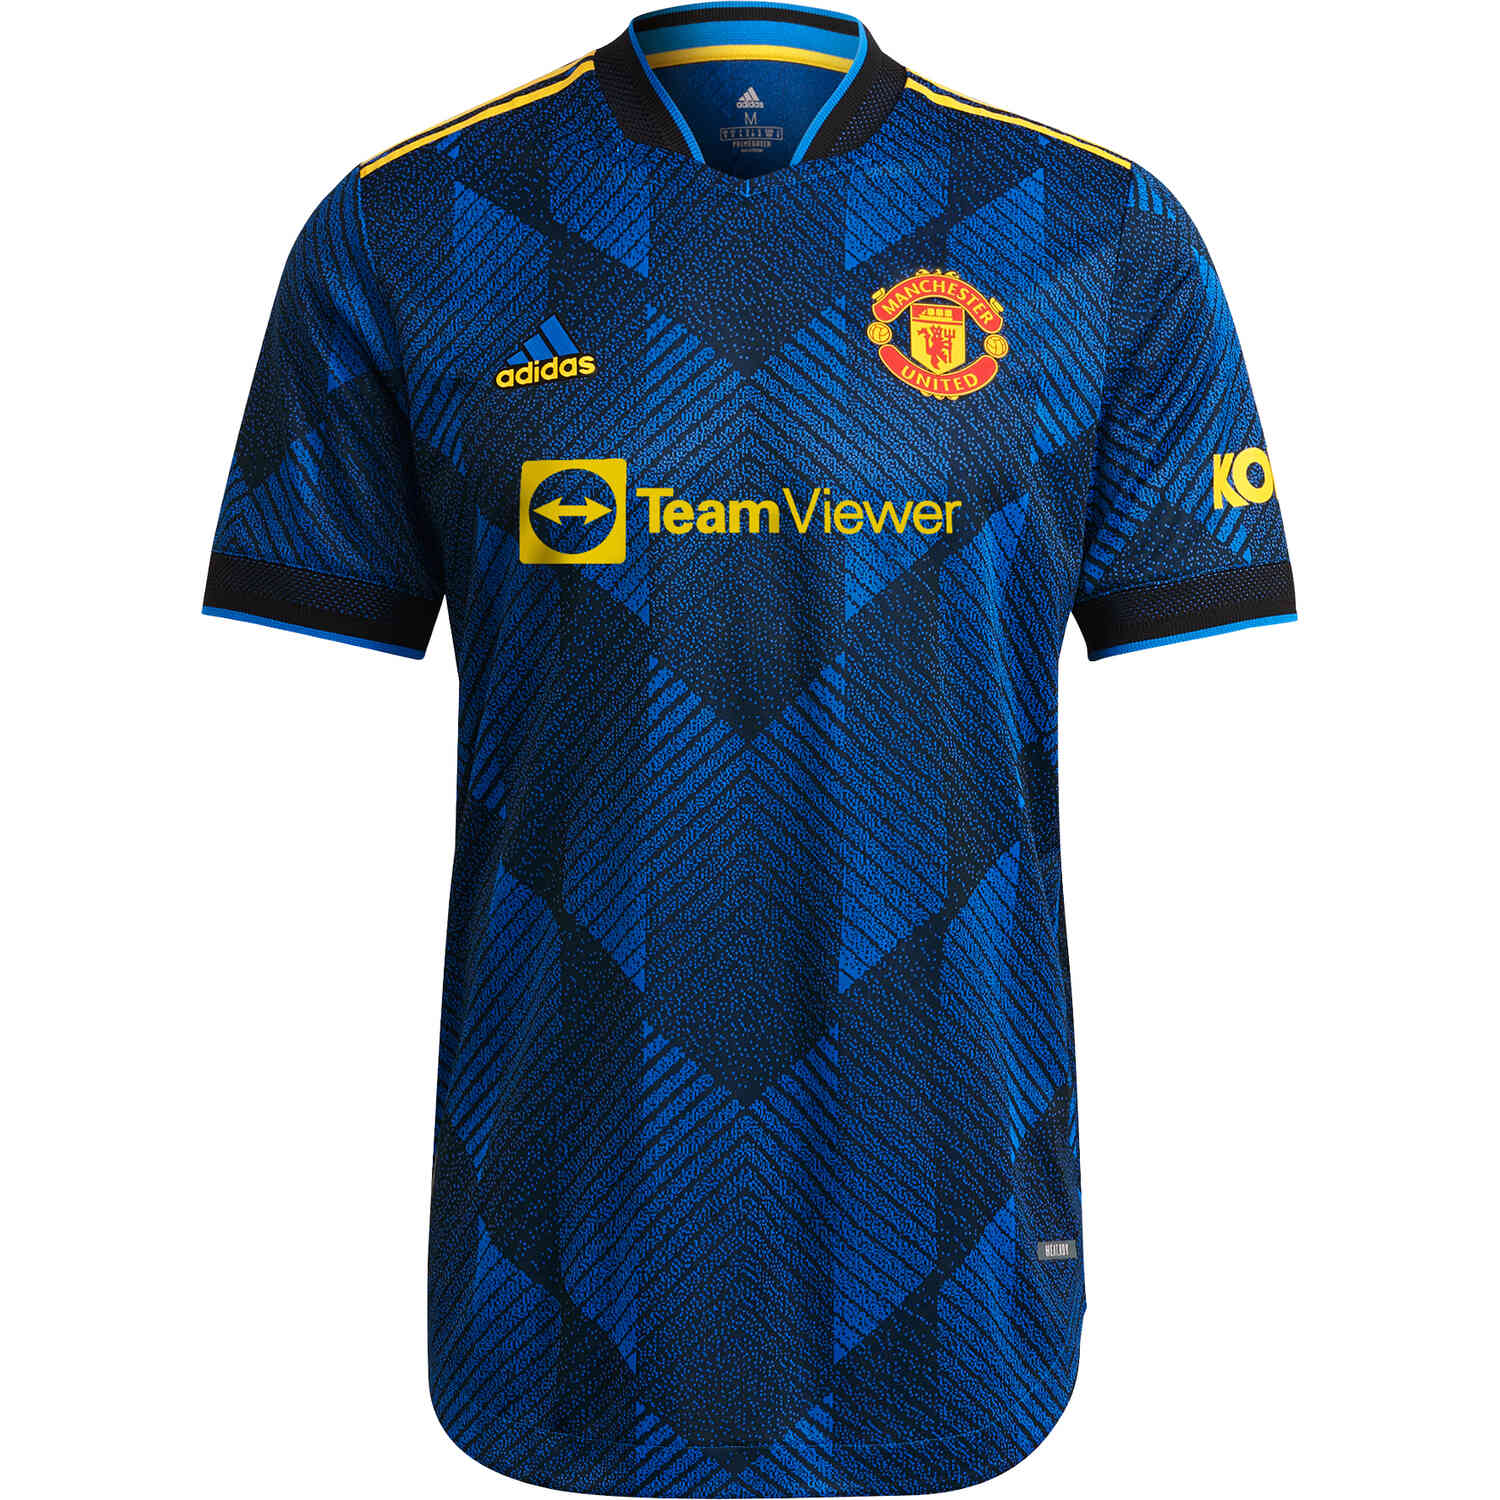 2021/22 adidas Manchester United 3rd Authentic Jersey - SoccerPro